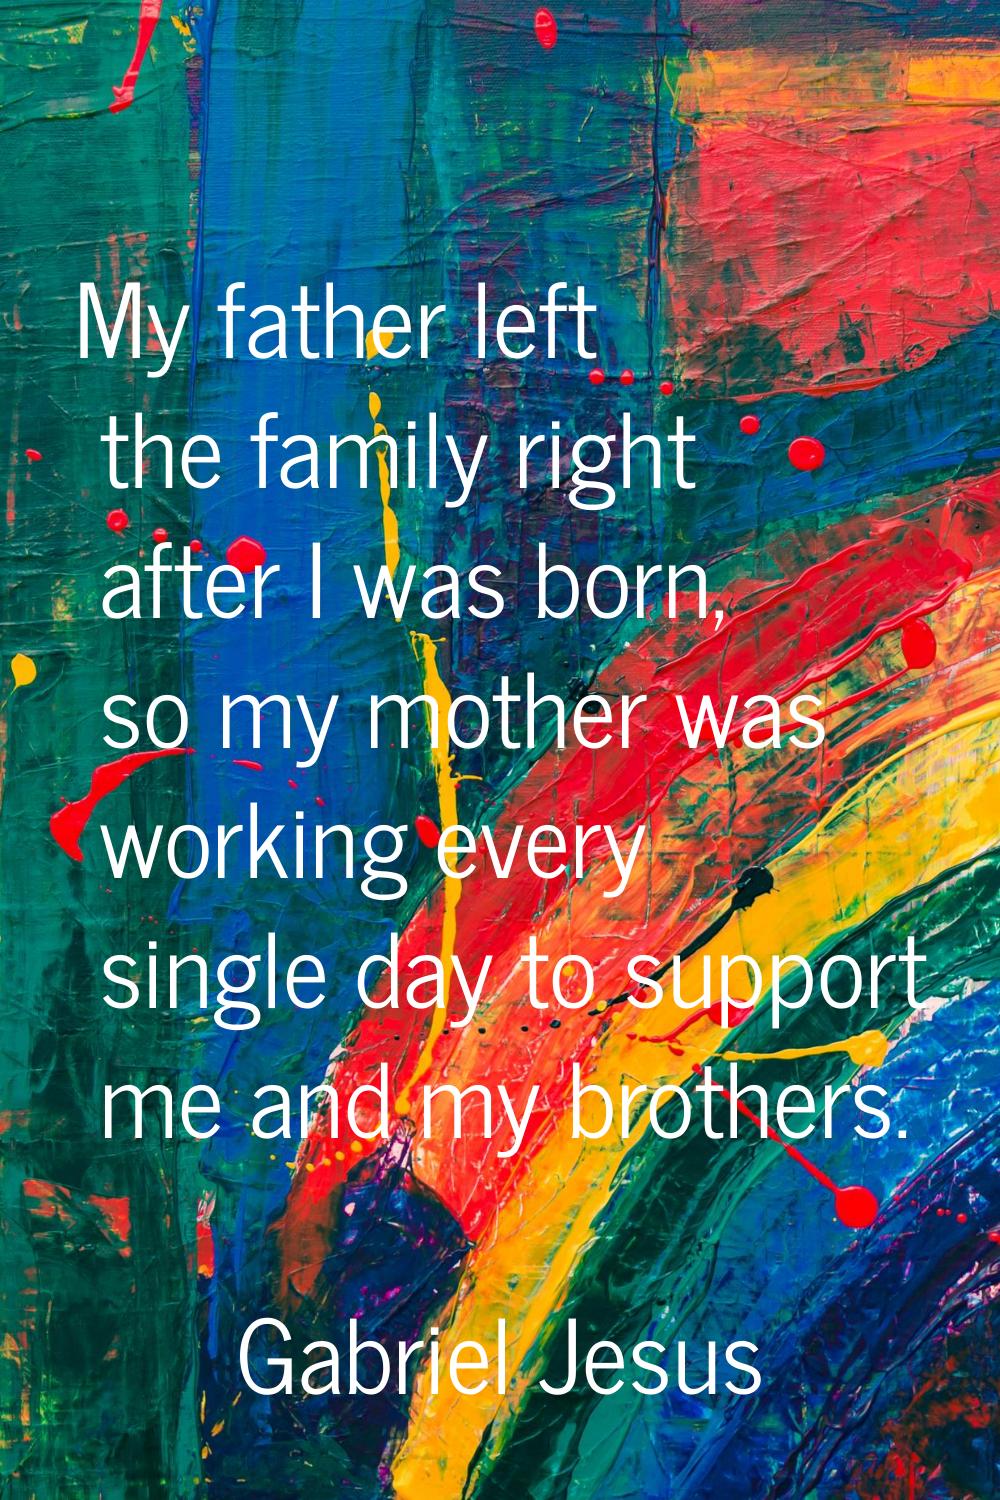 My father left the family right after I was born, so my mother was working every single day to supp